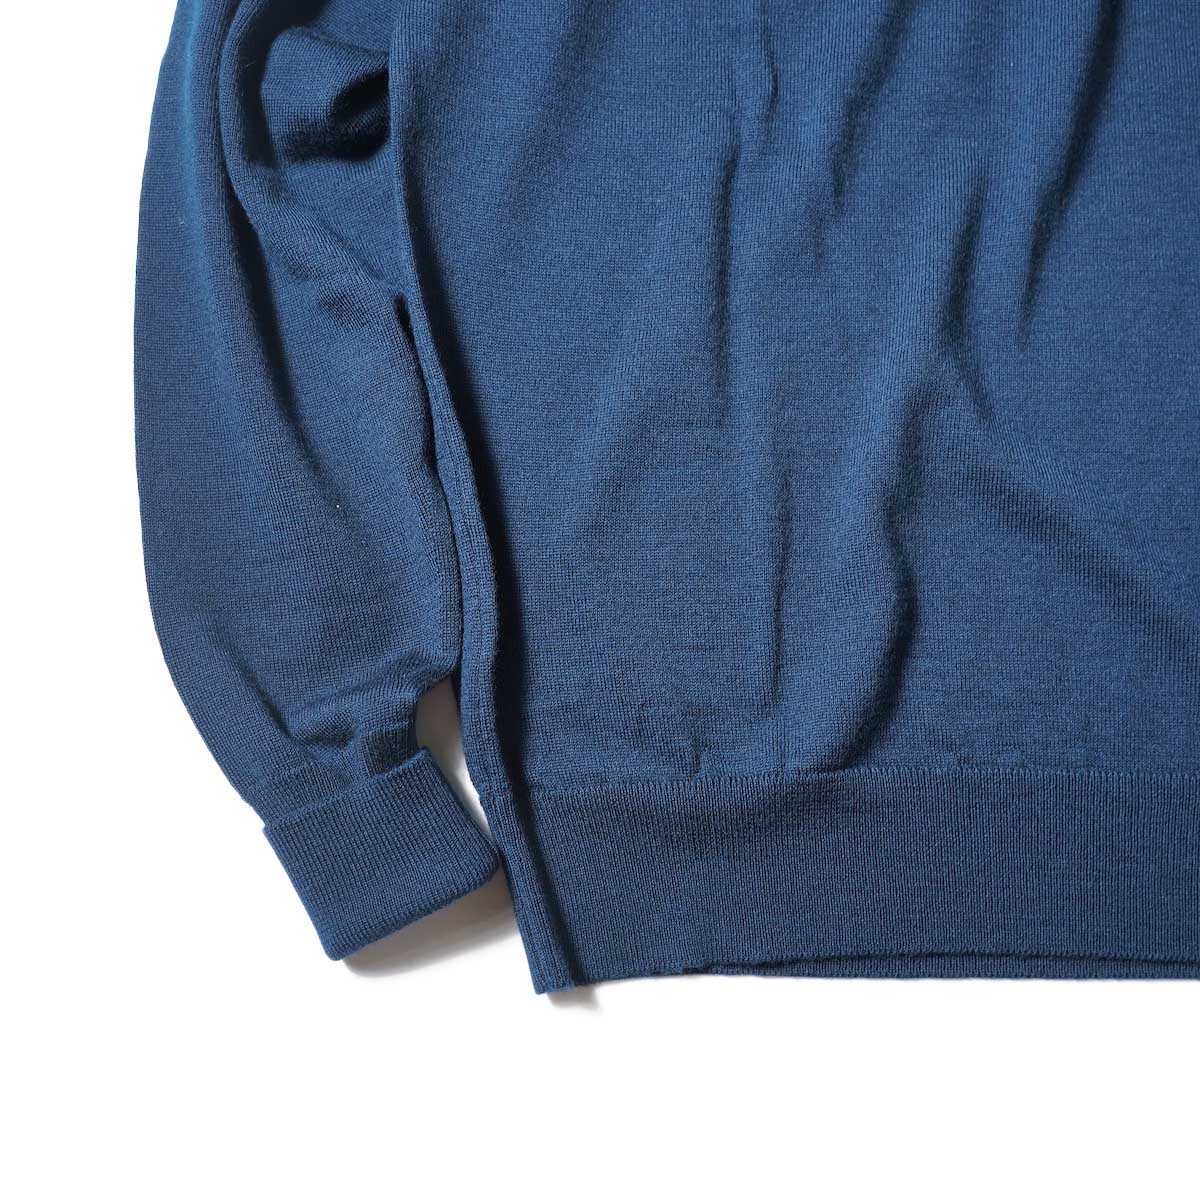 JOHN SMEDLEY / A4588 PULLOVER RC LS (Orion Green)裾、袖